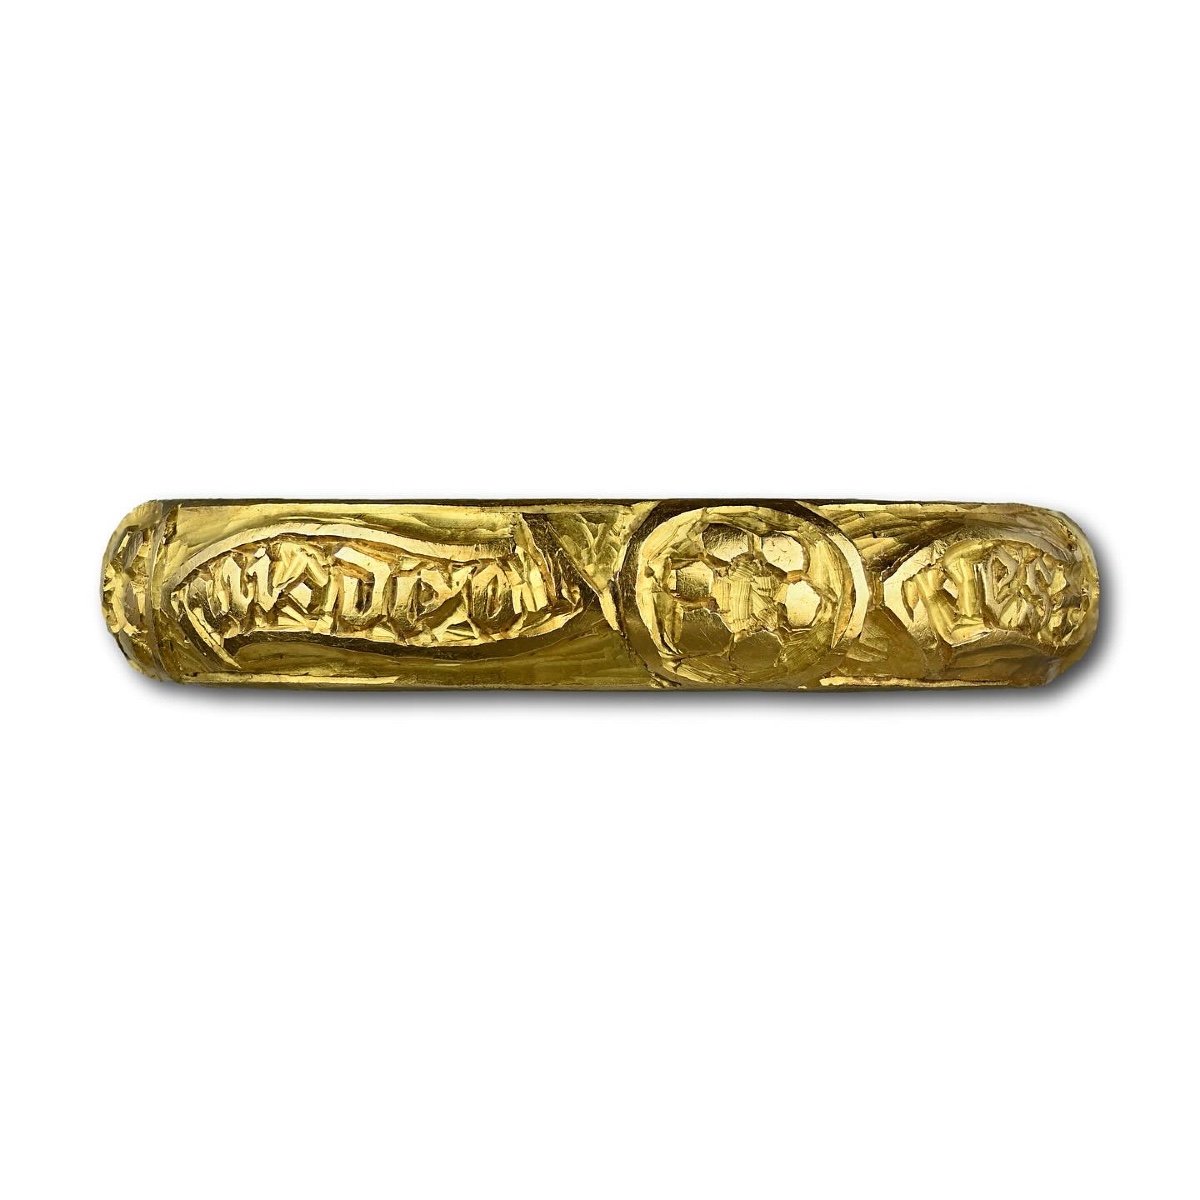 Gold Posy Ring Engraved With Black Letter. Probably English, 15th Century.-photo-3